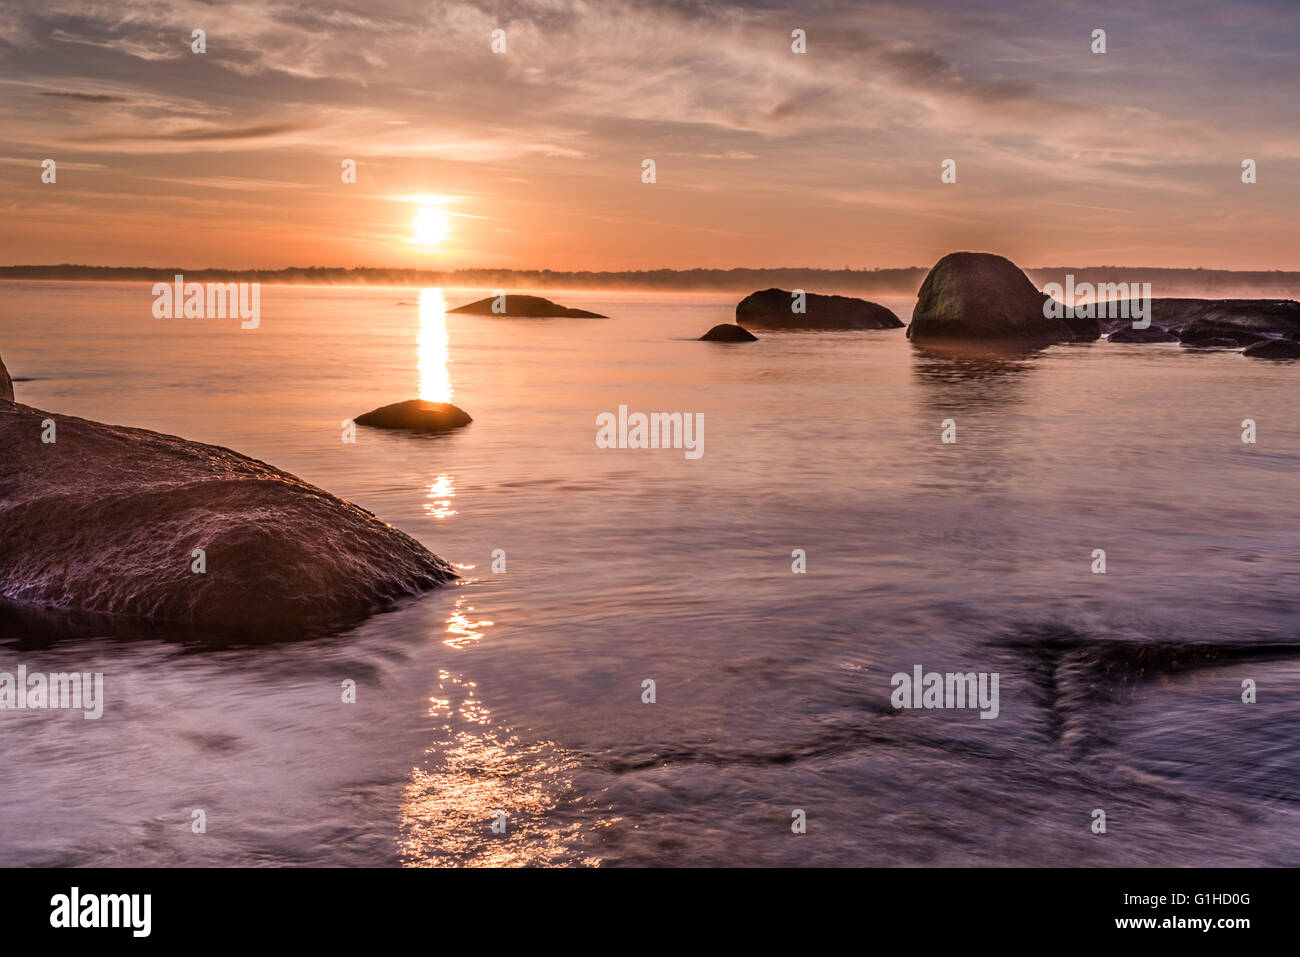 Colorful sunrise over the sea viewed from the beach rocks Stock Photo